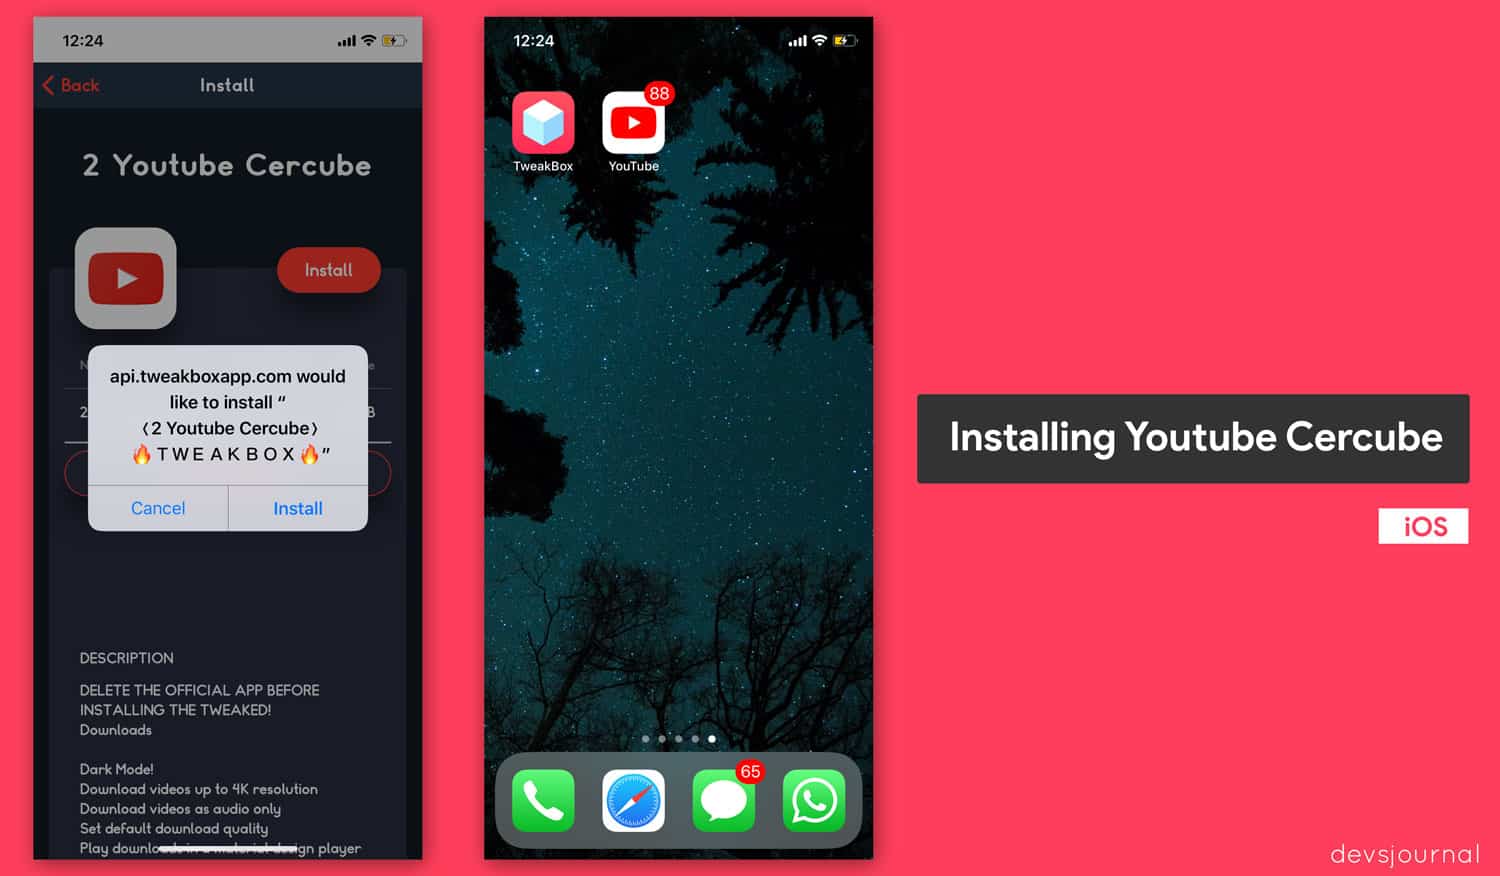 Install YouTube Cercube App to play YouTube videos in background download Audio files